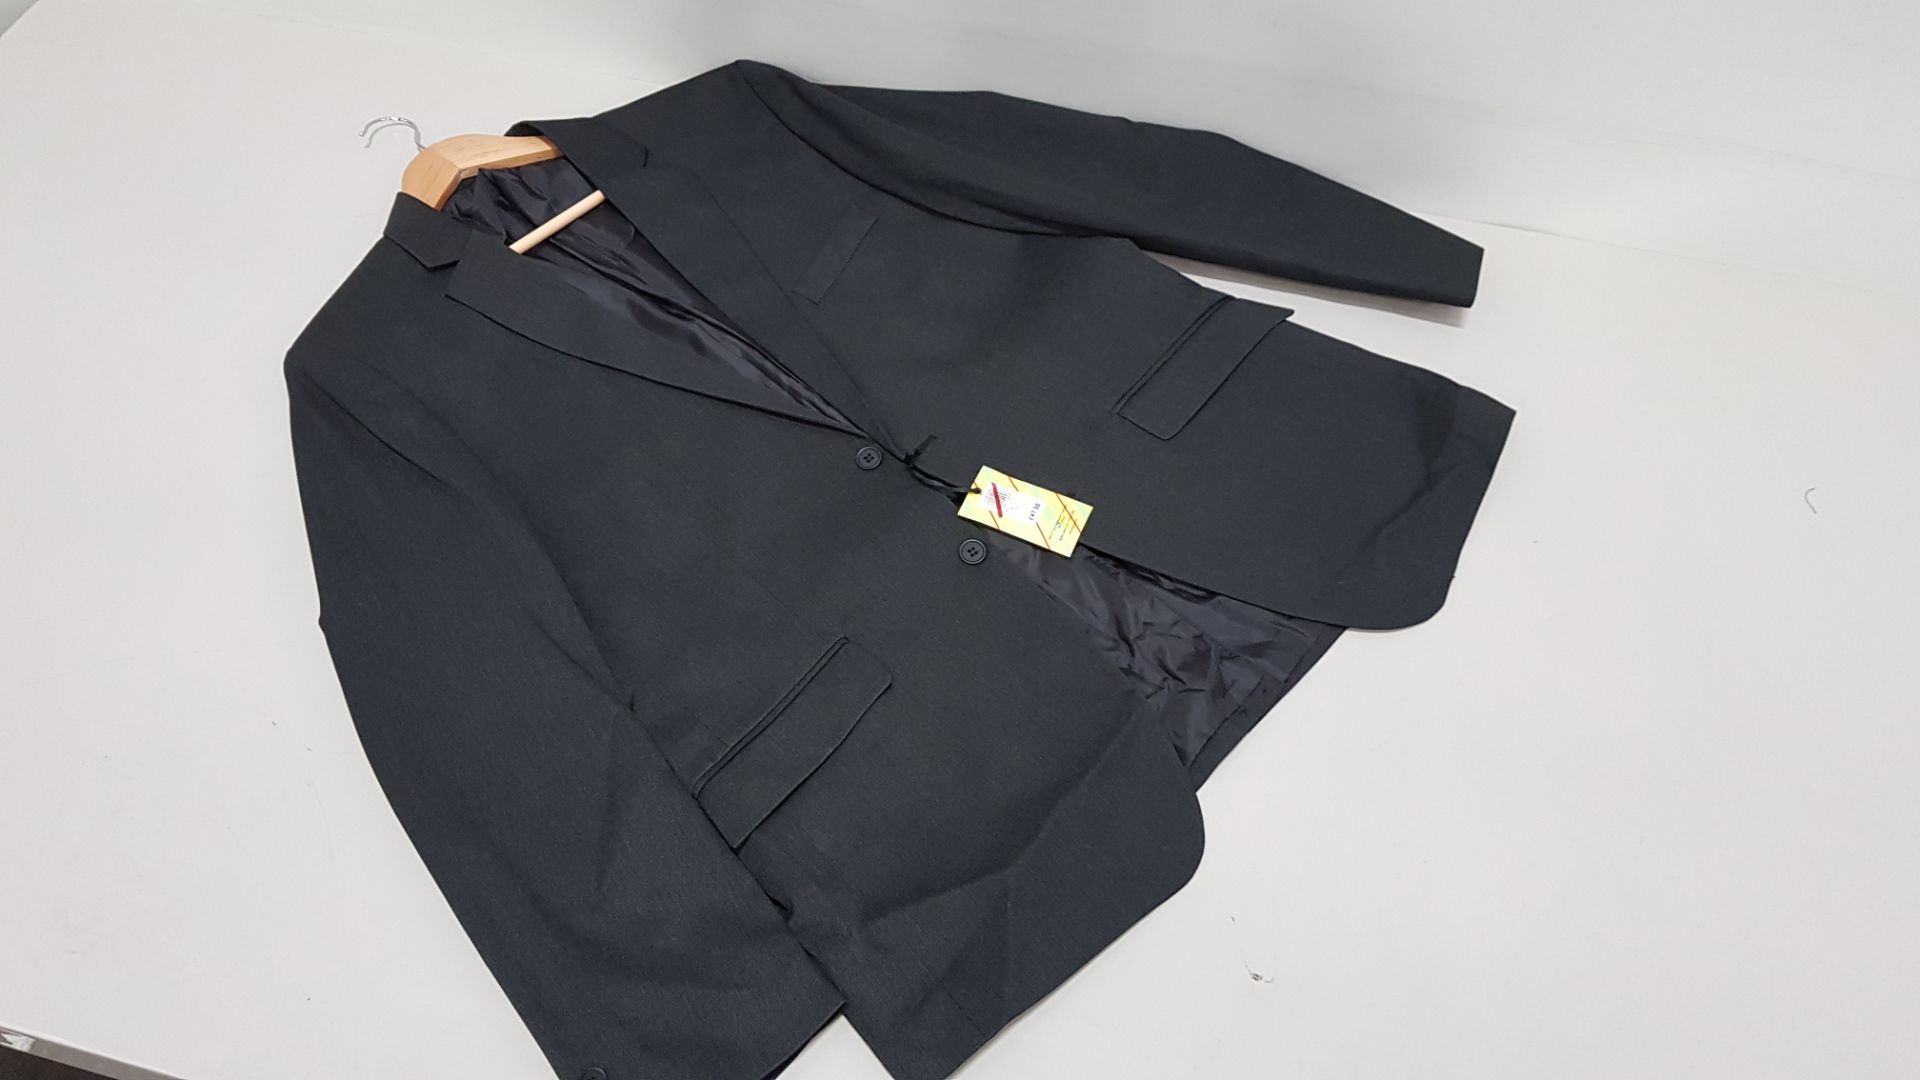 8 X BRAND NEW JOHN LEWIS SMART SIXTH FORM CHARCOAL JACKETS SIZE 44 RRP £47.00 (TOTAL RRP £376.00)